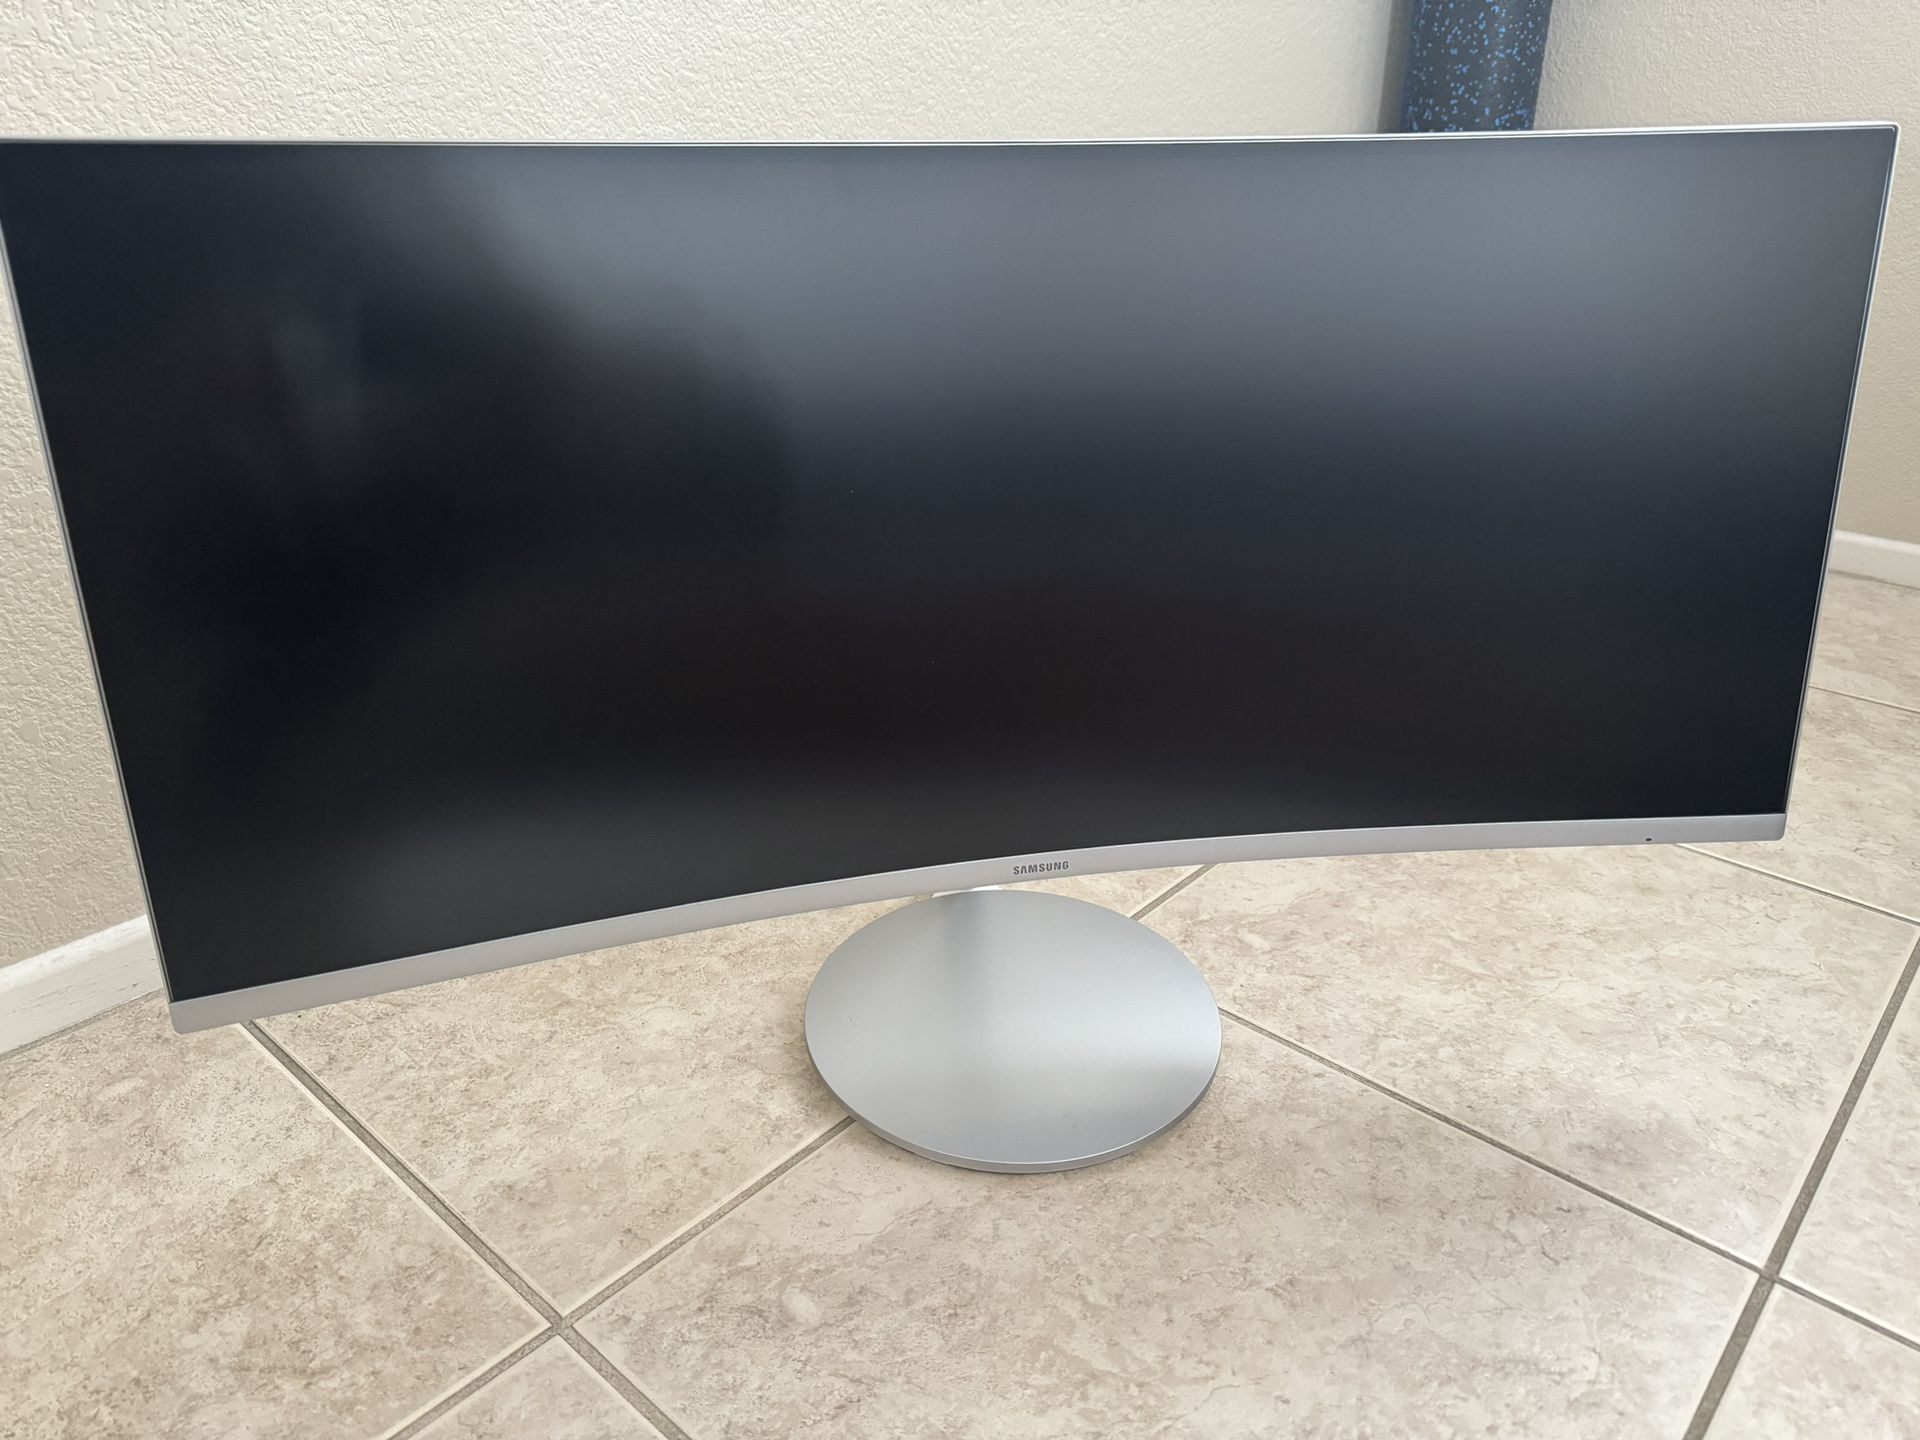 Samsung 34” Curved Monitor - Barely Used!